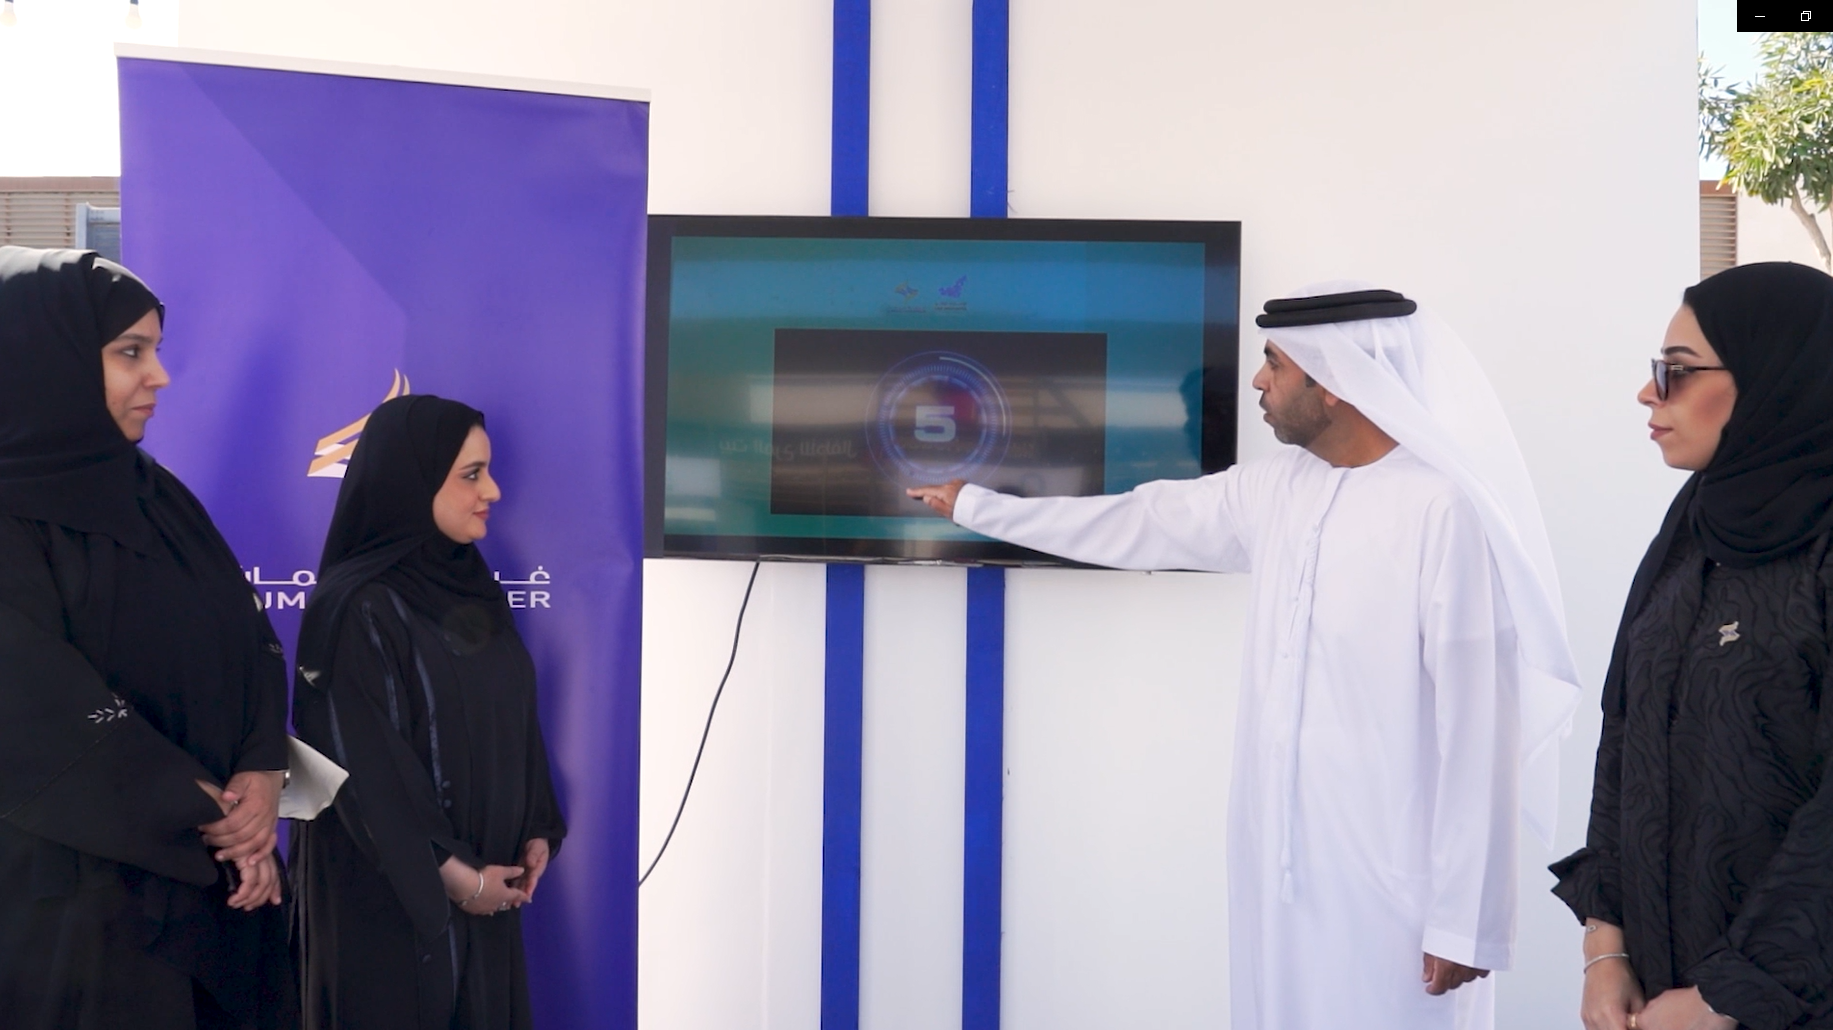 Ajman Chamber launches an “innovative community electronic platform” during its participation in the activities of Innovation Week in Ajman